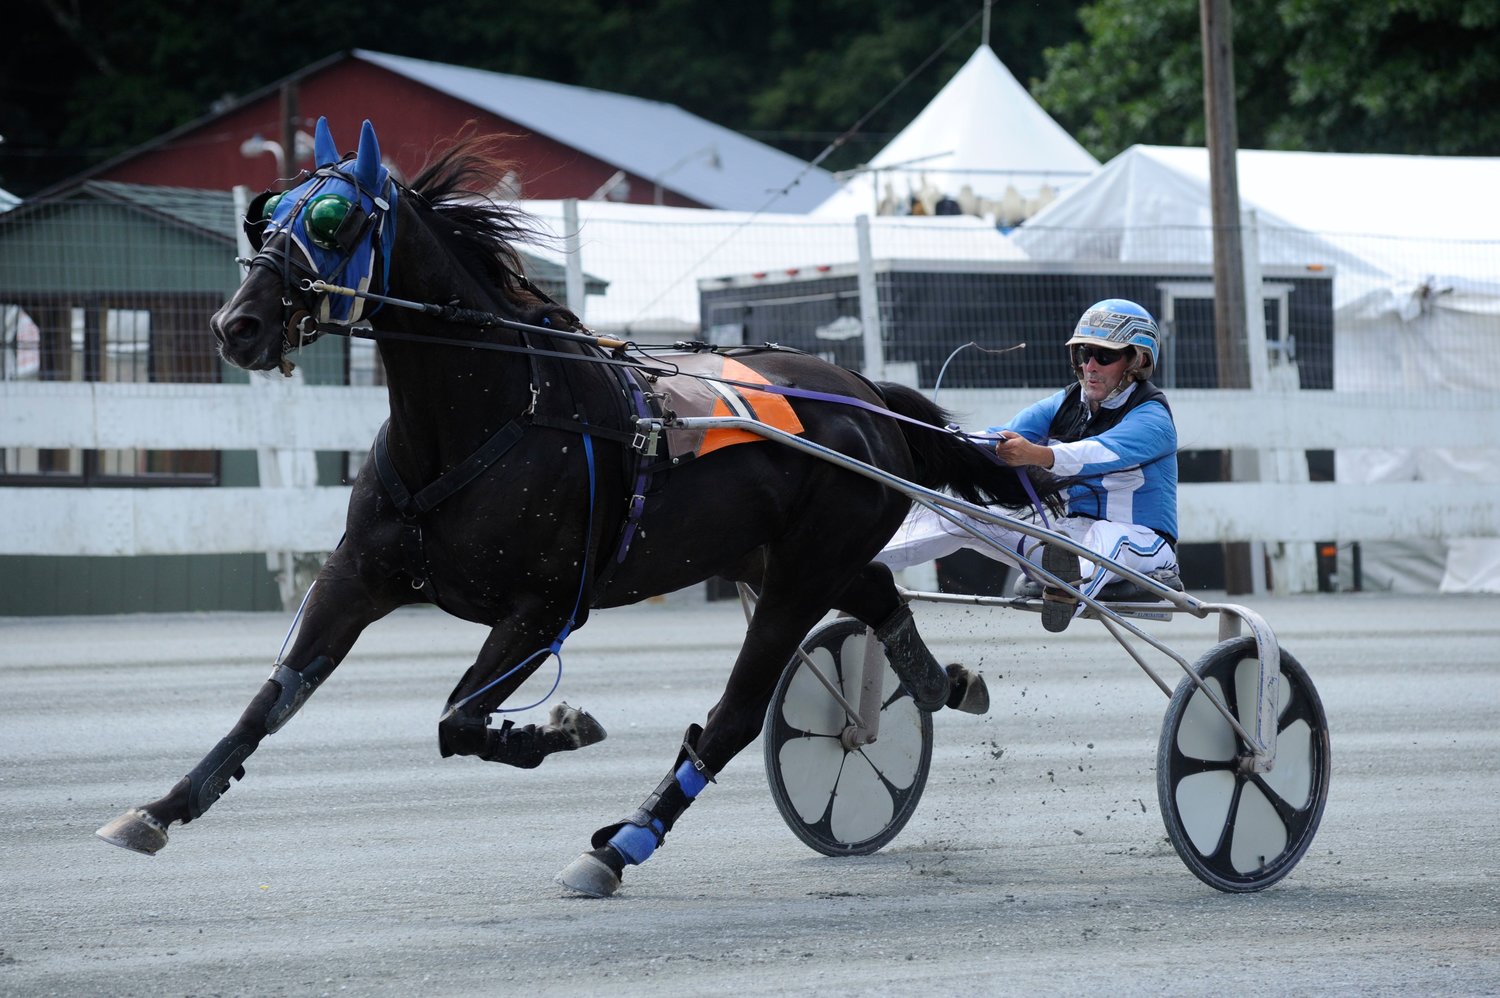 In the Al Perkins Memorial Free for All Trot, Drew Chellis drove Papi Hanover to a 2nd place finish.